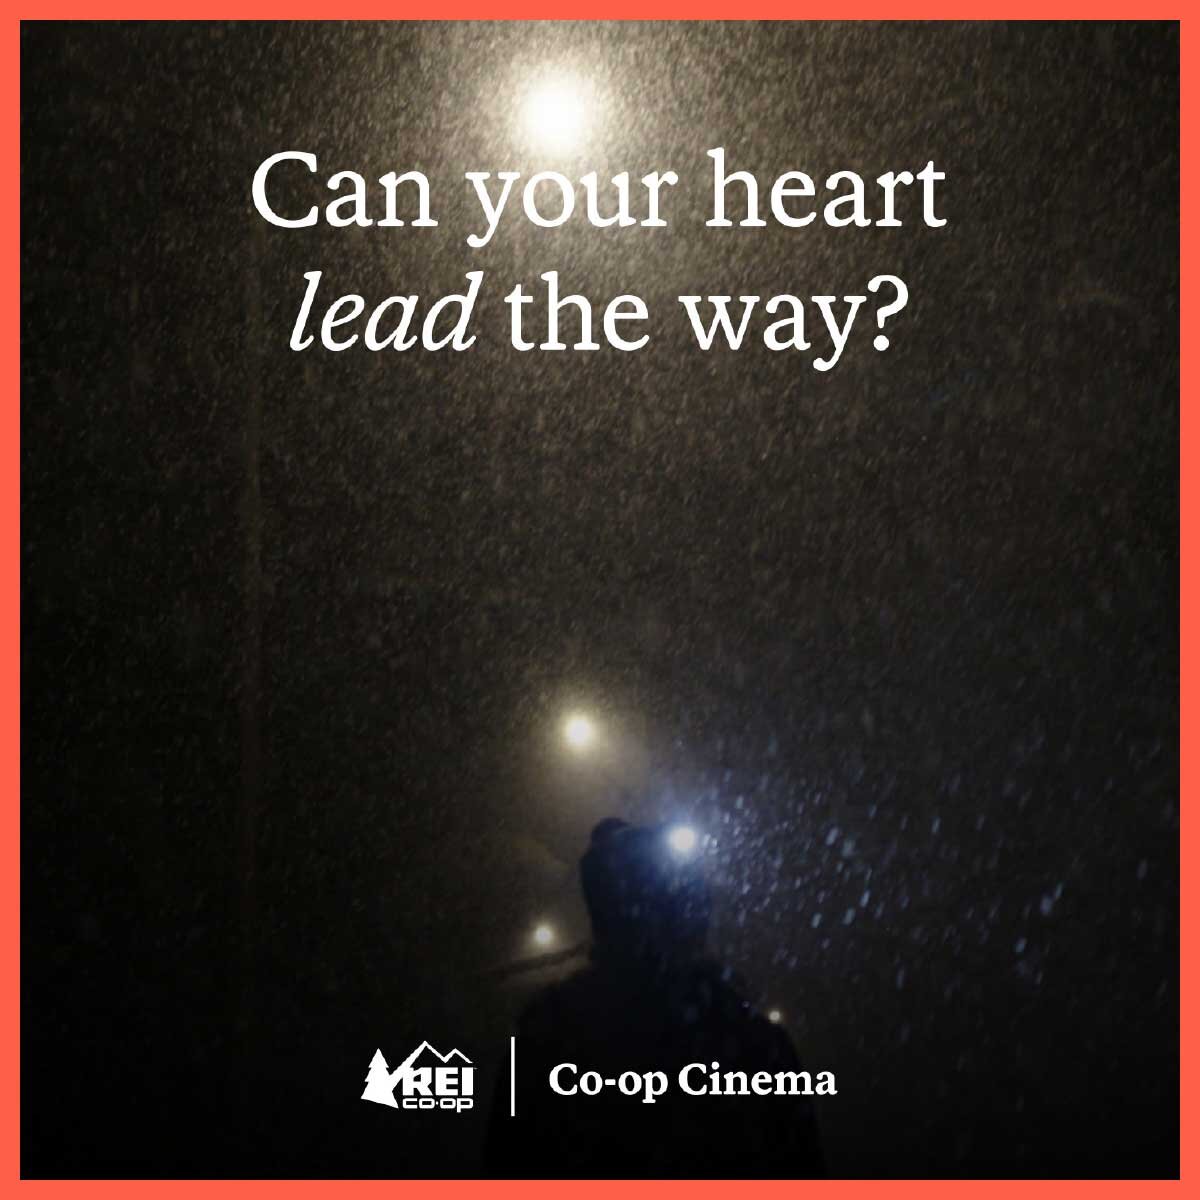 Can your heart lead the way?